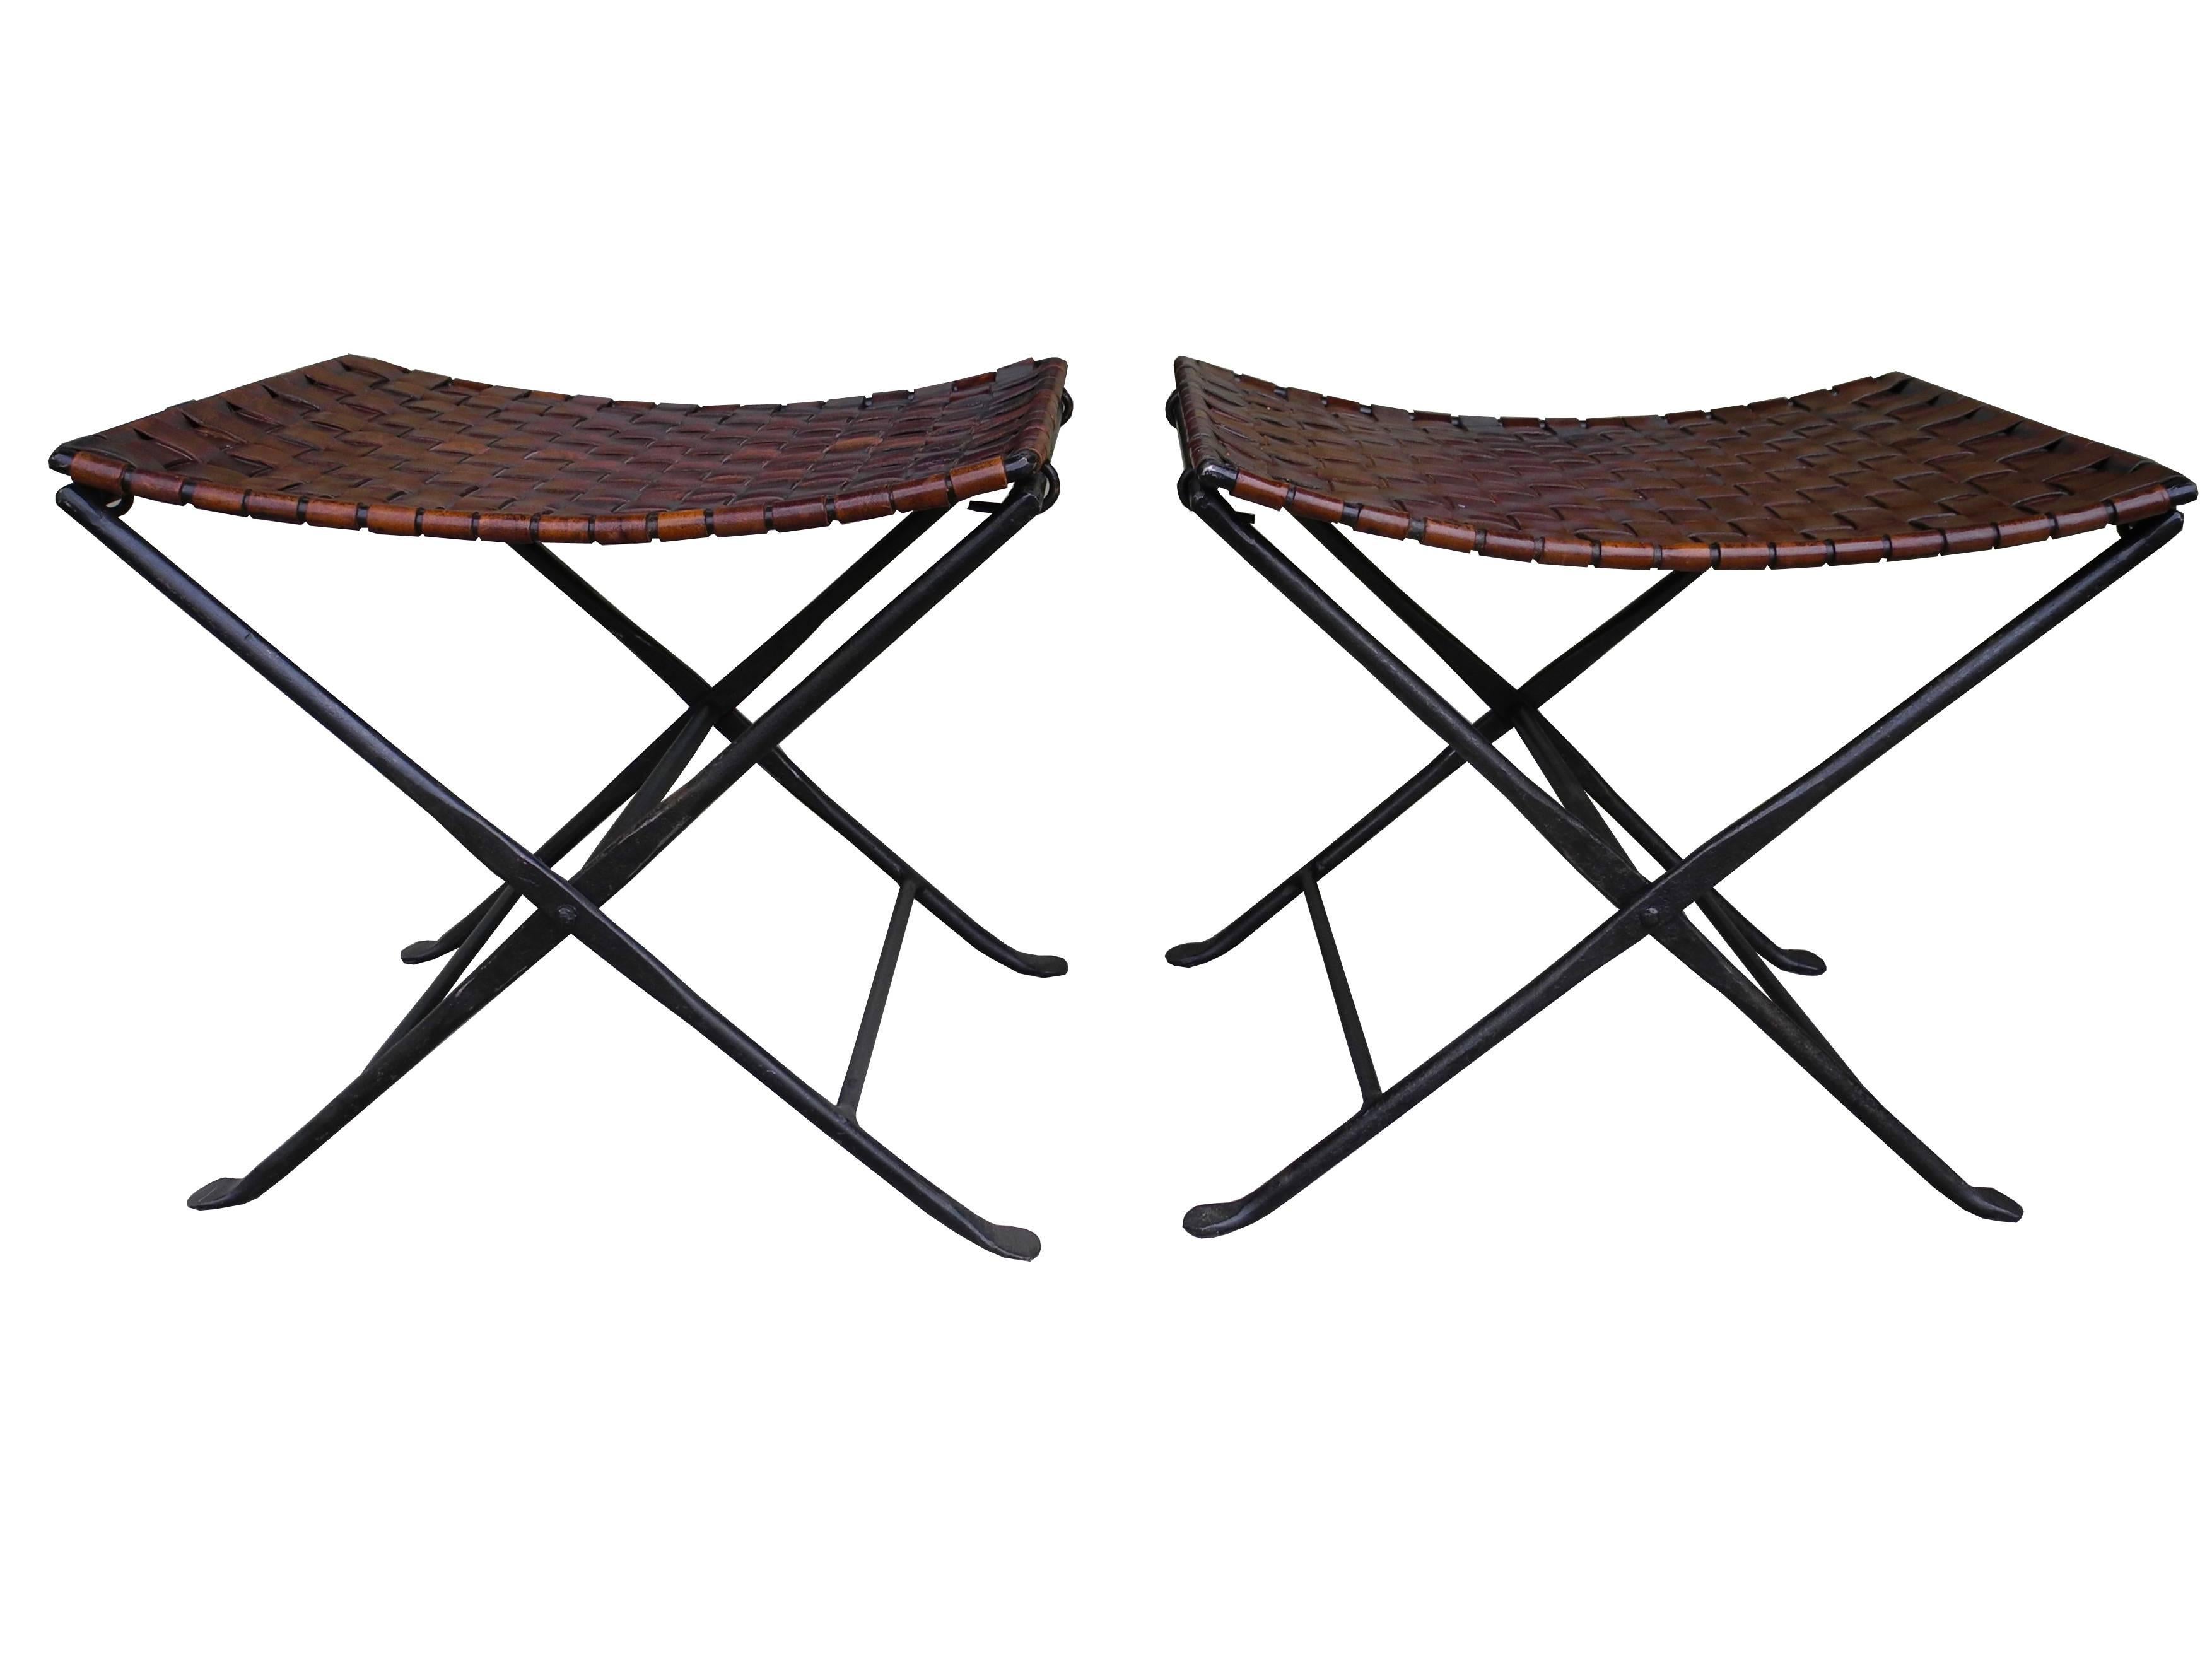 These stools were handcrafted made of forged wrought iron and woven strips of brown saddle leather.